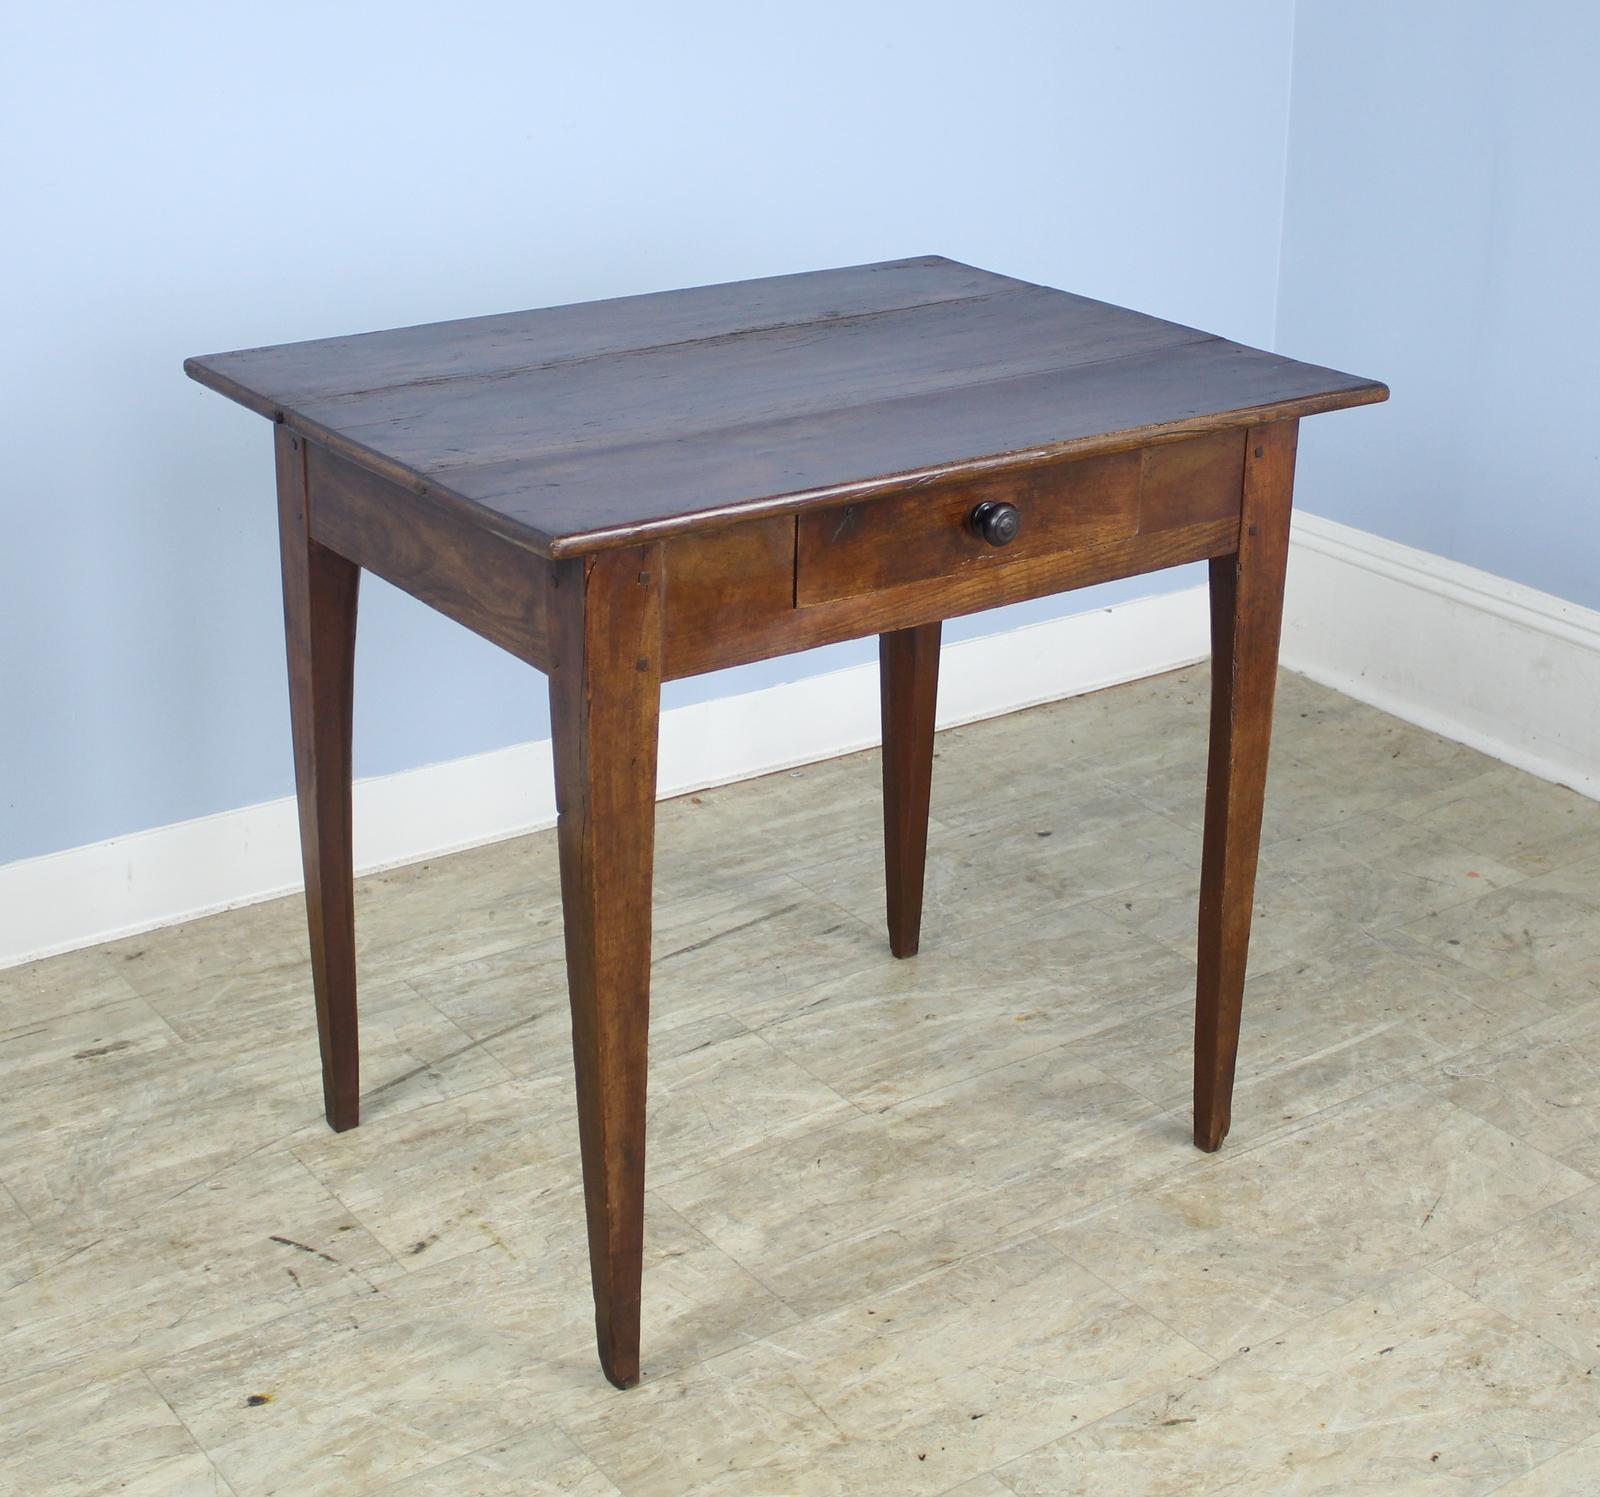 A handsome side table in rich walnut with classic tapered legs and a single drawer. The top has some interesting old wear, shown. Grain and patina are very nice.